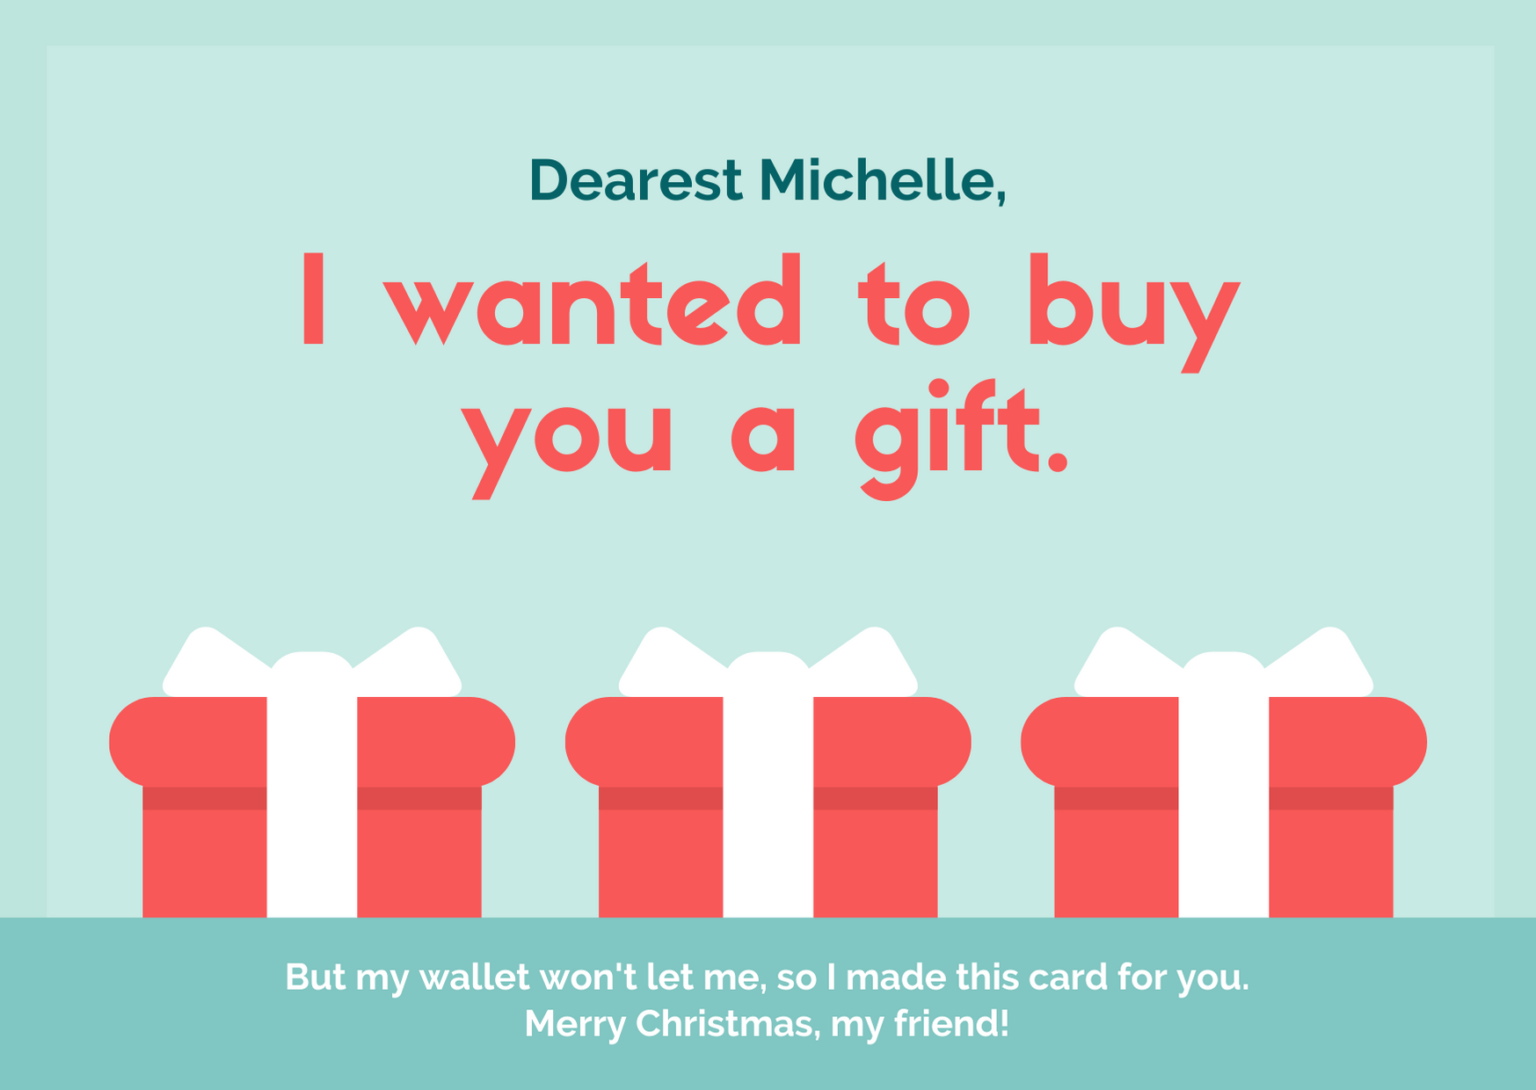 quirky-gift-card-message-ideas-for-all-occasions-just-in-time-gourmet